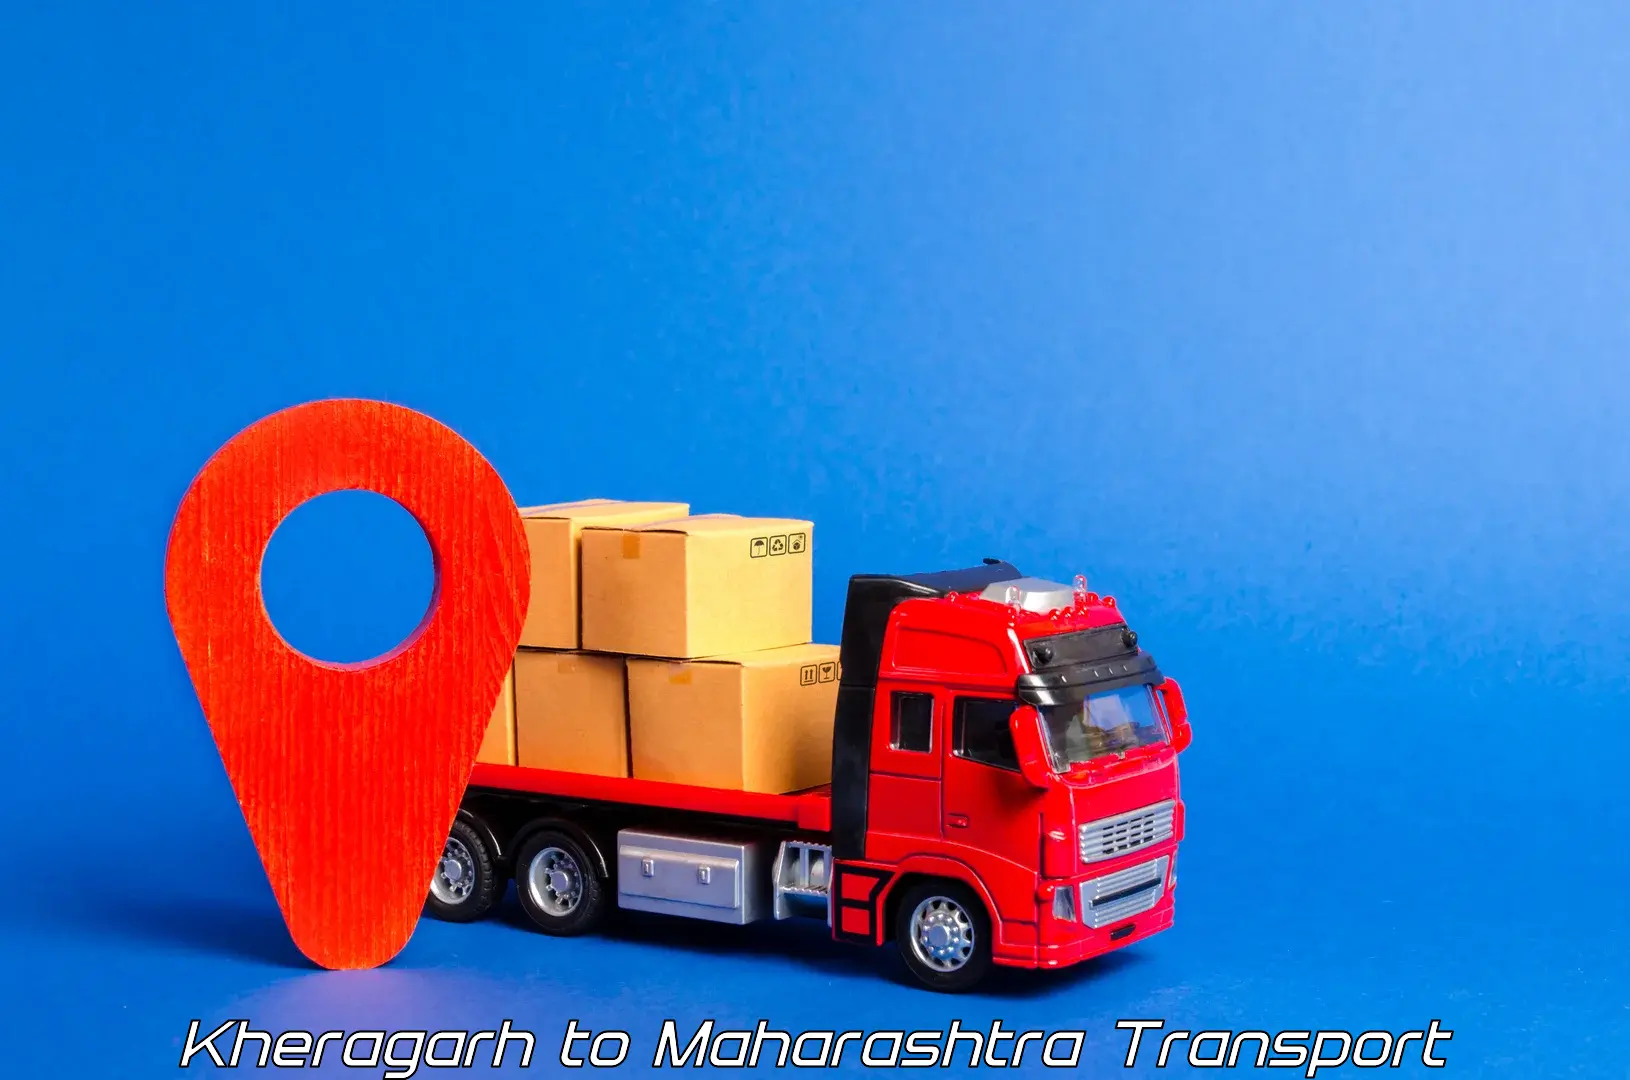 Package delivery services Kheragarh to Aurangabad